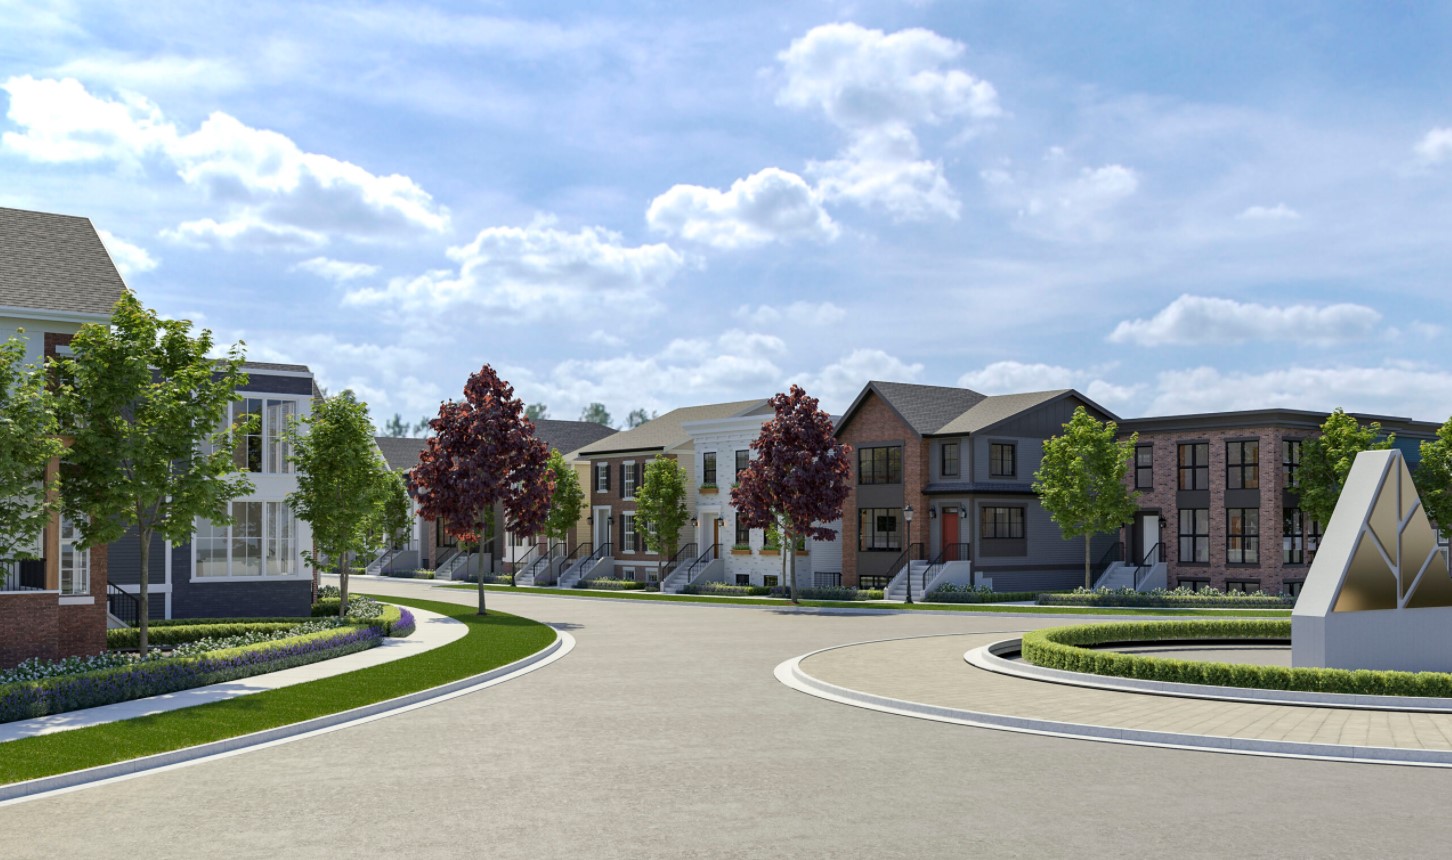 Cedarbrook by Westbow – Availability, Prices, Plans